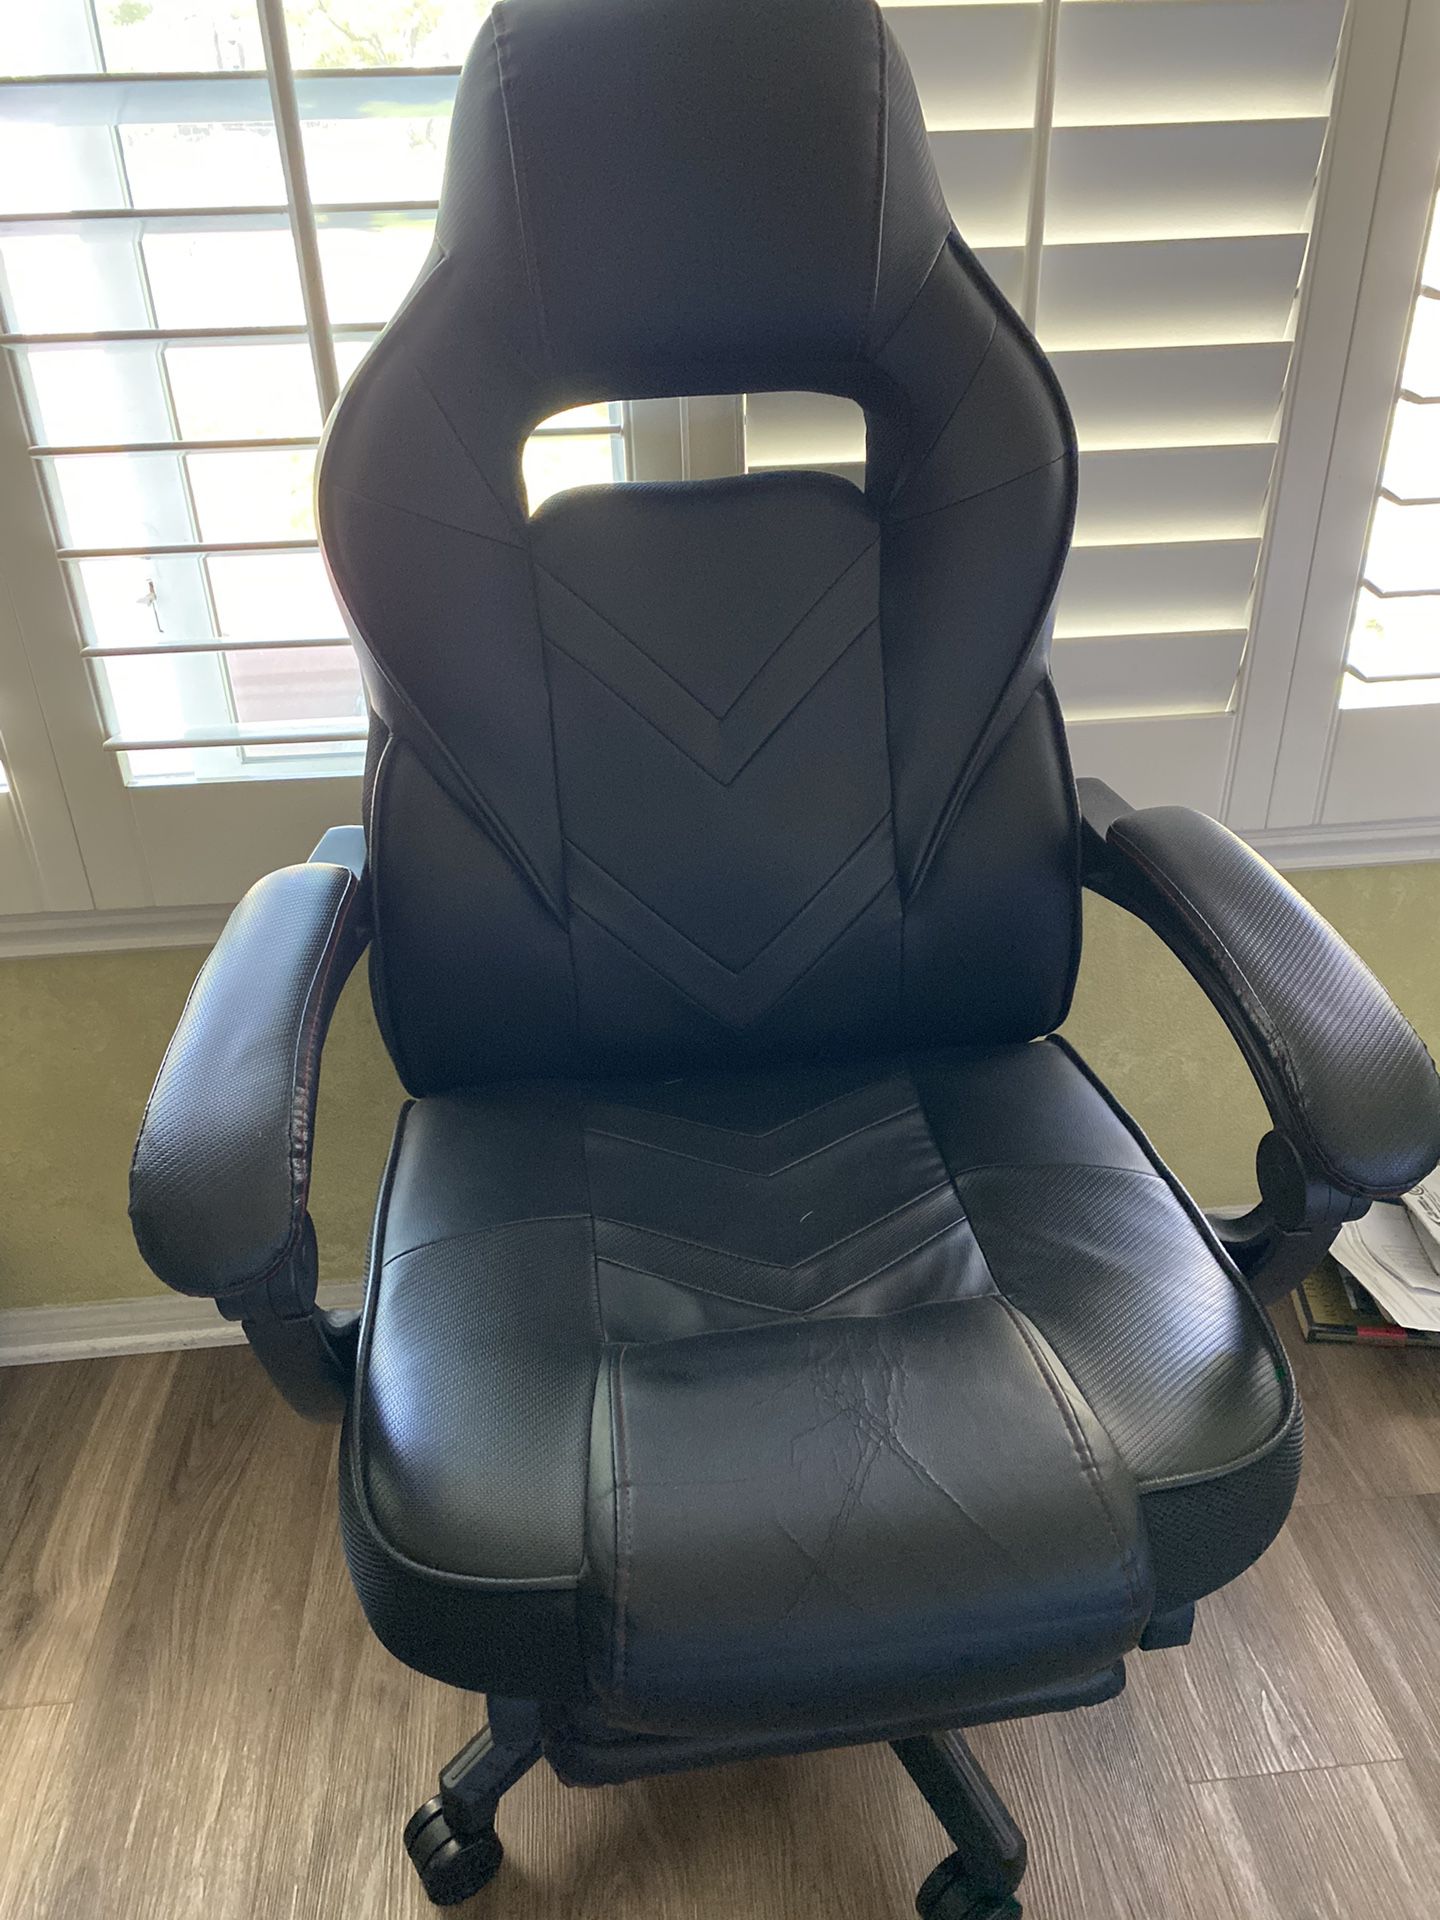 Office Chair $50